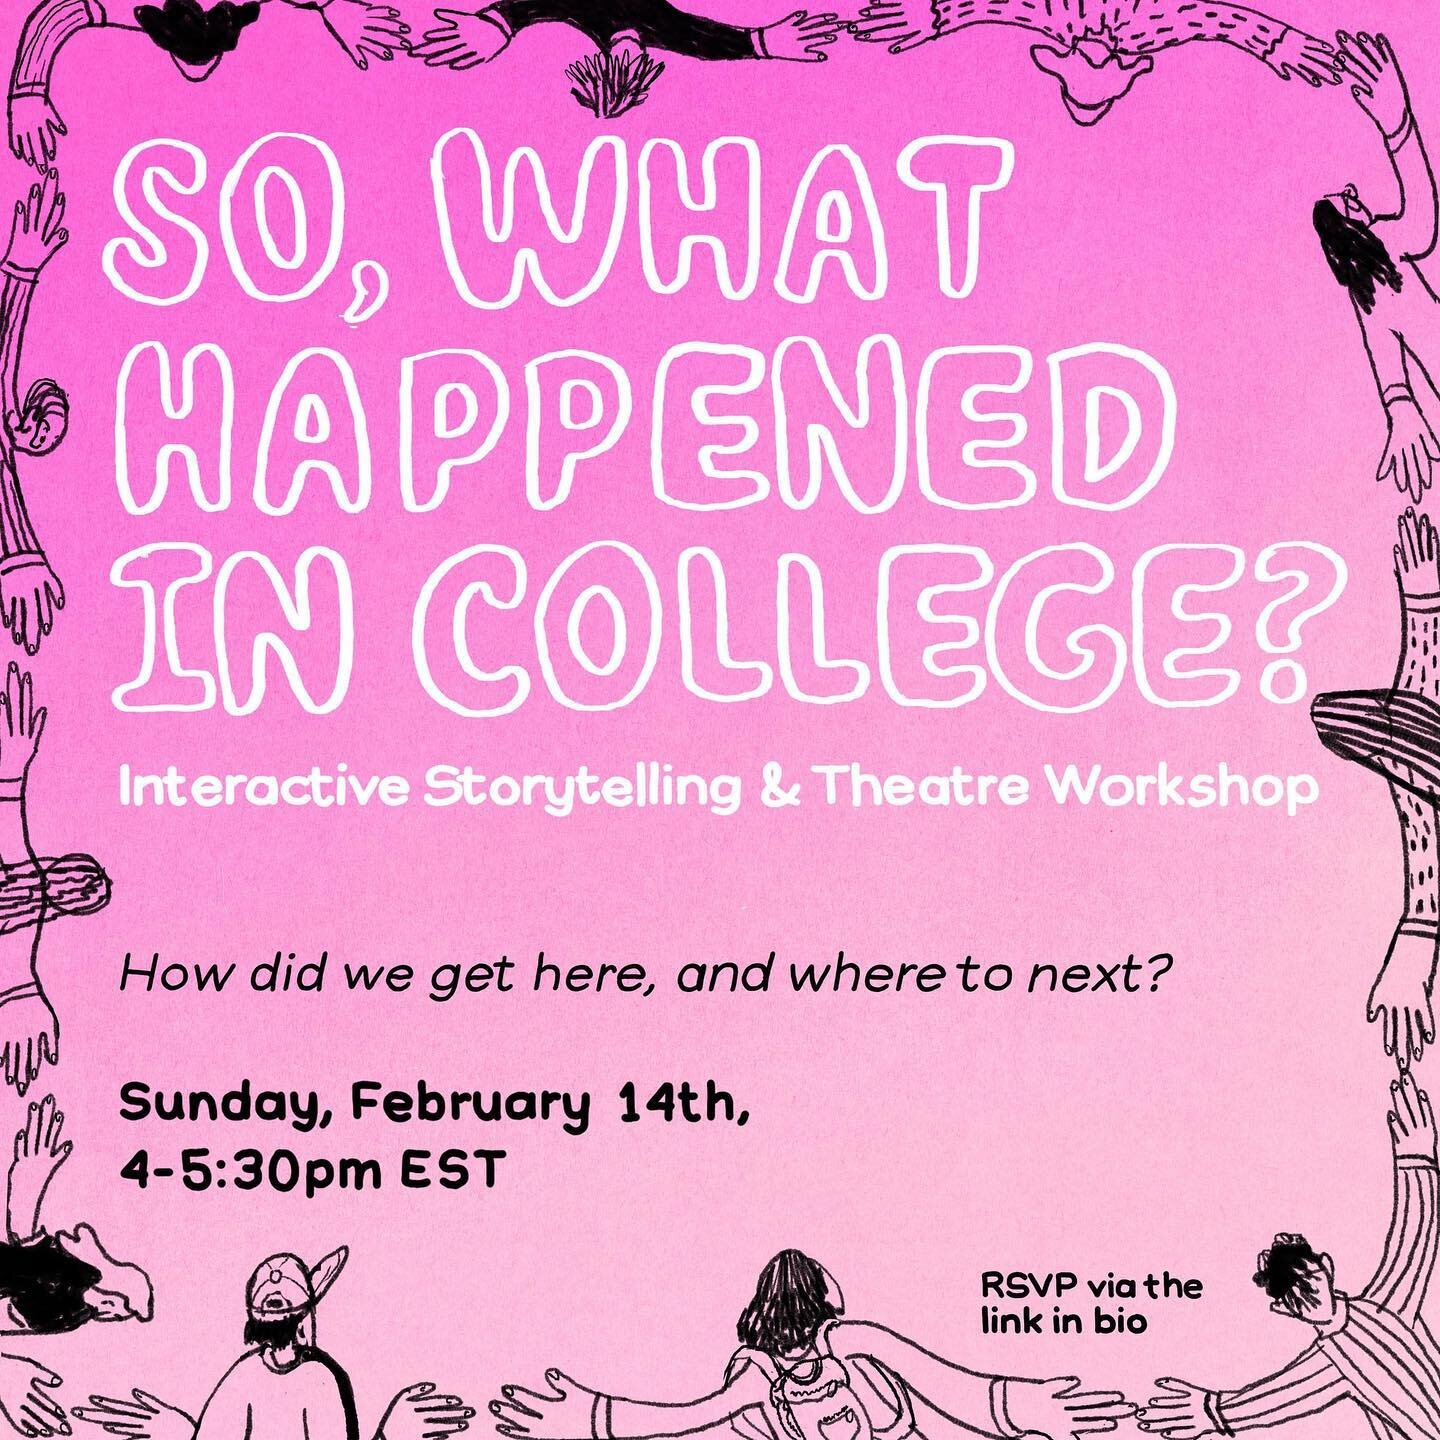 How have our college experiences shaped what kind of change we want to make and what kind of changemakers we want to be? How did we enter into or deepen our relationships with movement spaces during those years? Join us for an interactive storytellin